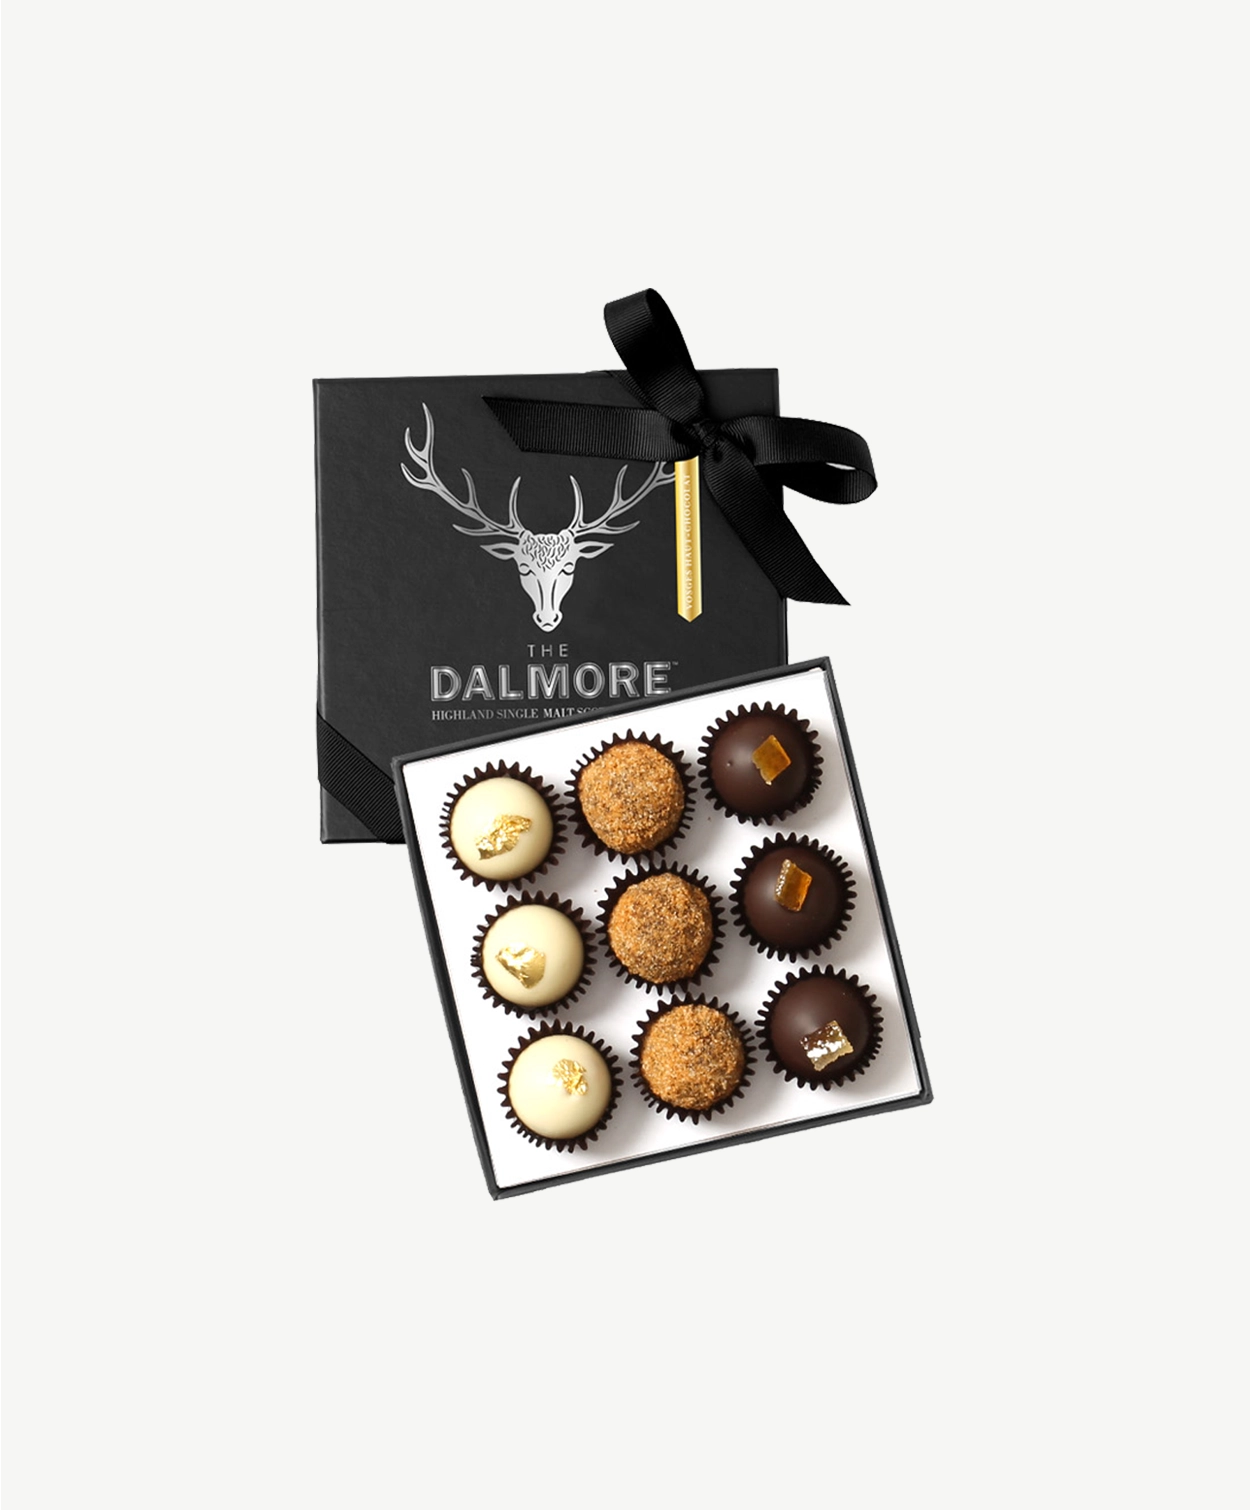 An open, black candy box adorned in silver foil tied with a black ribbon bow displays three rows of Vosges Dalmore chocolate truffles topped with spiced ginger crumb, gold leaf and candied orange peel sit in on a light grey background.